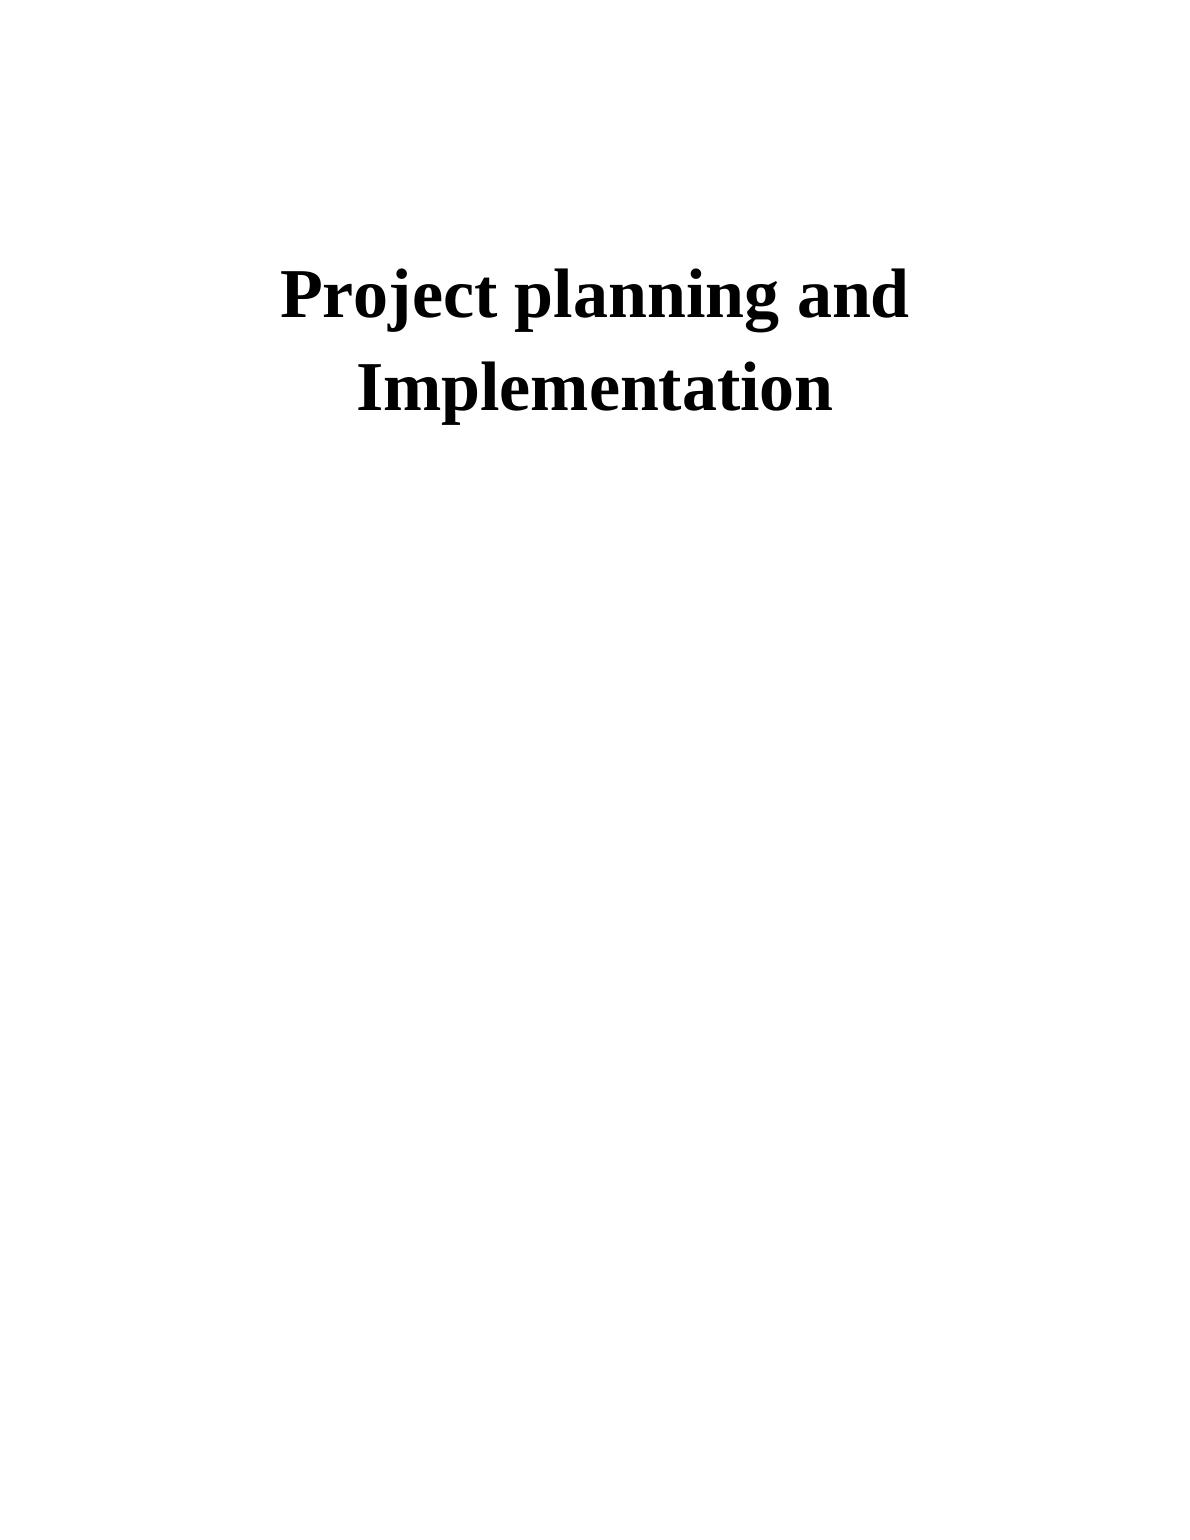 Project Planning and Implementation_1